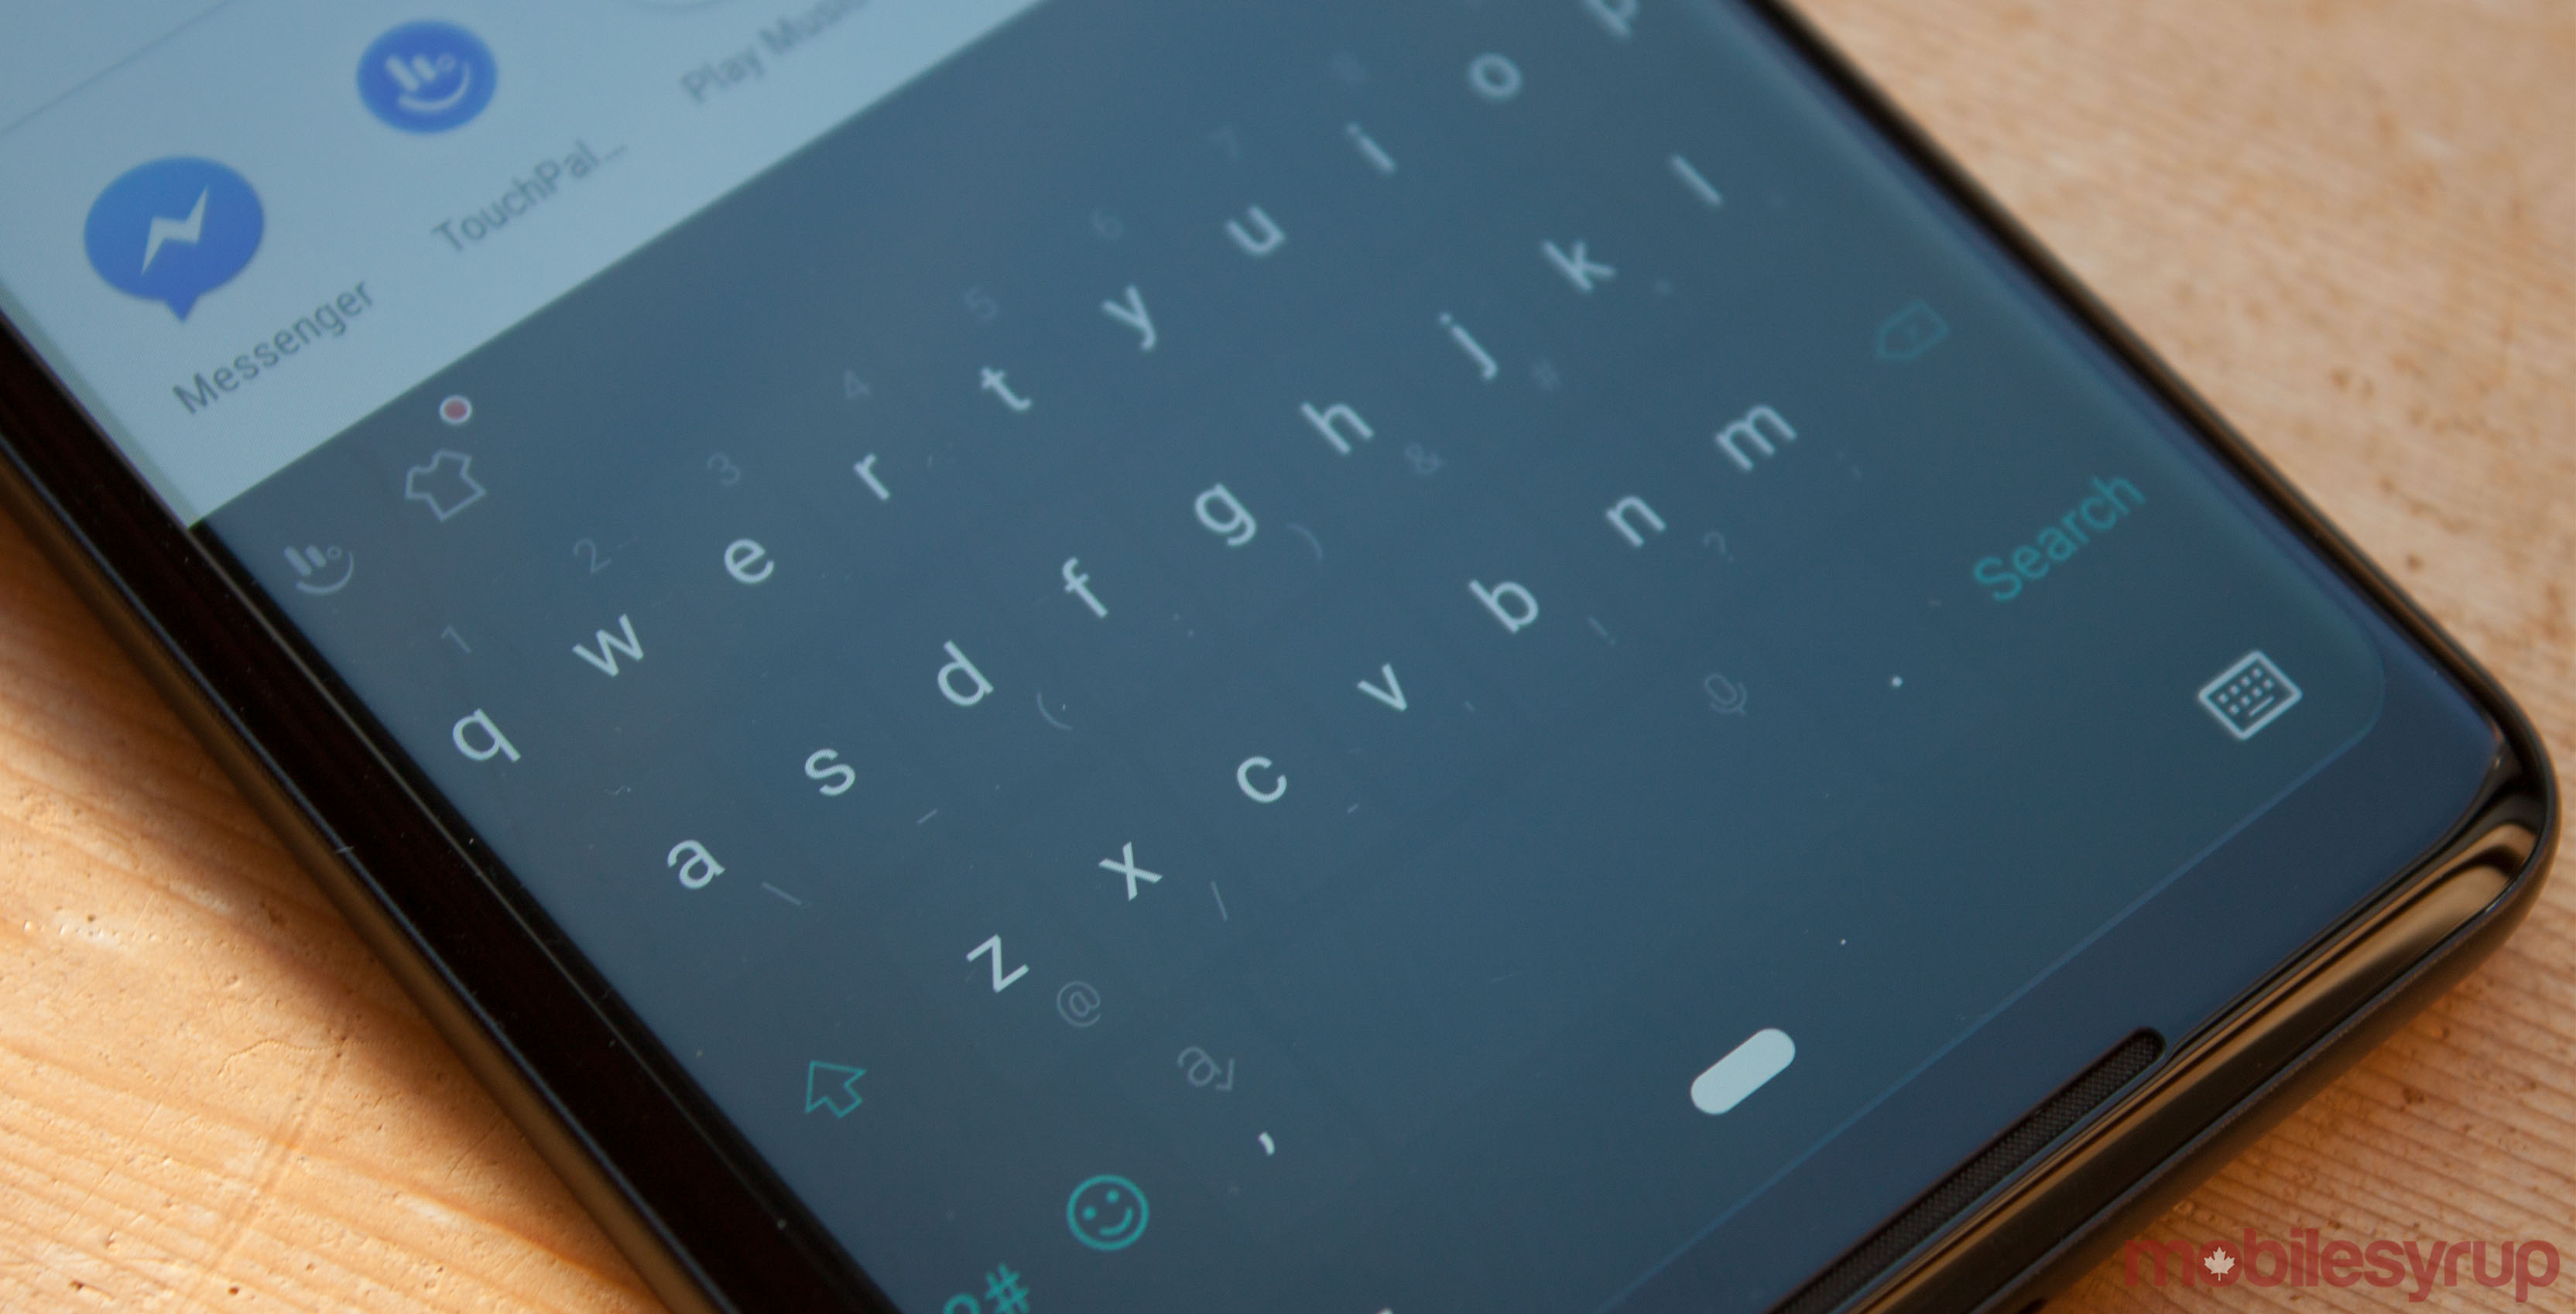 TouchPal keyboard on Android